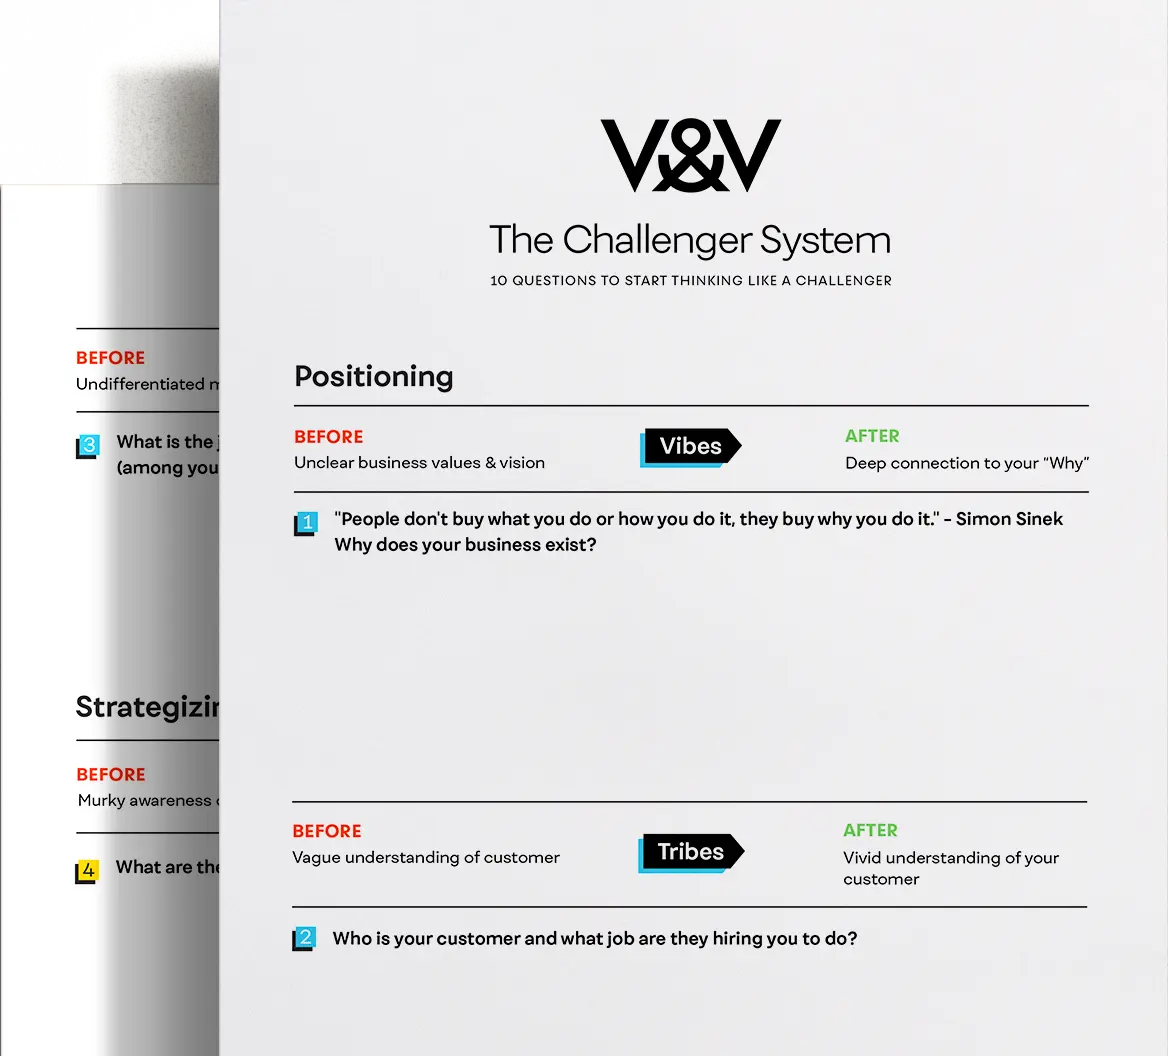 PDF preview of 5&Vine's "10 Questions to Start Thinking Like a Challenger" worksheet for founders and marketing teams to tap into a Challenger Mindset using the agency's proprietary "Challenger System".